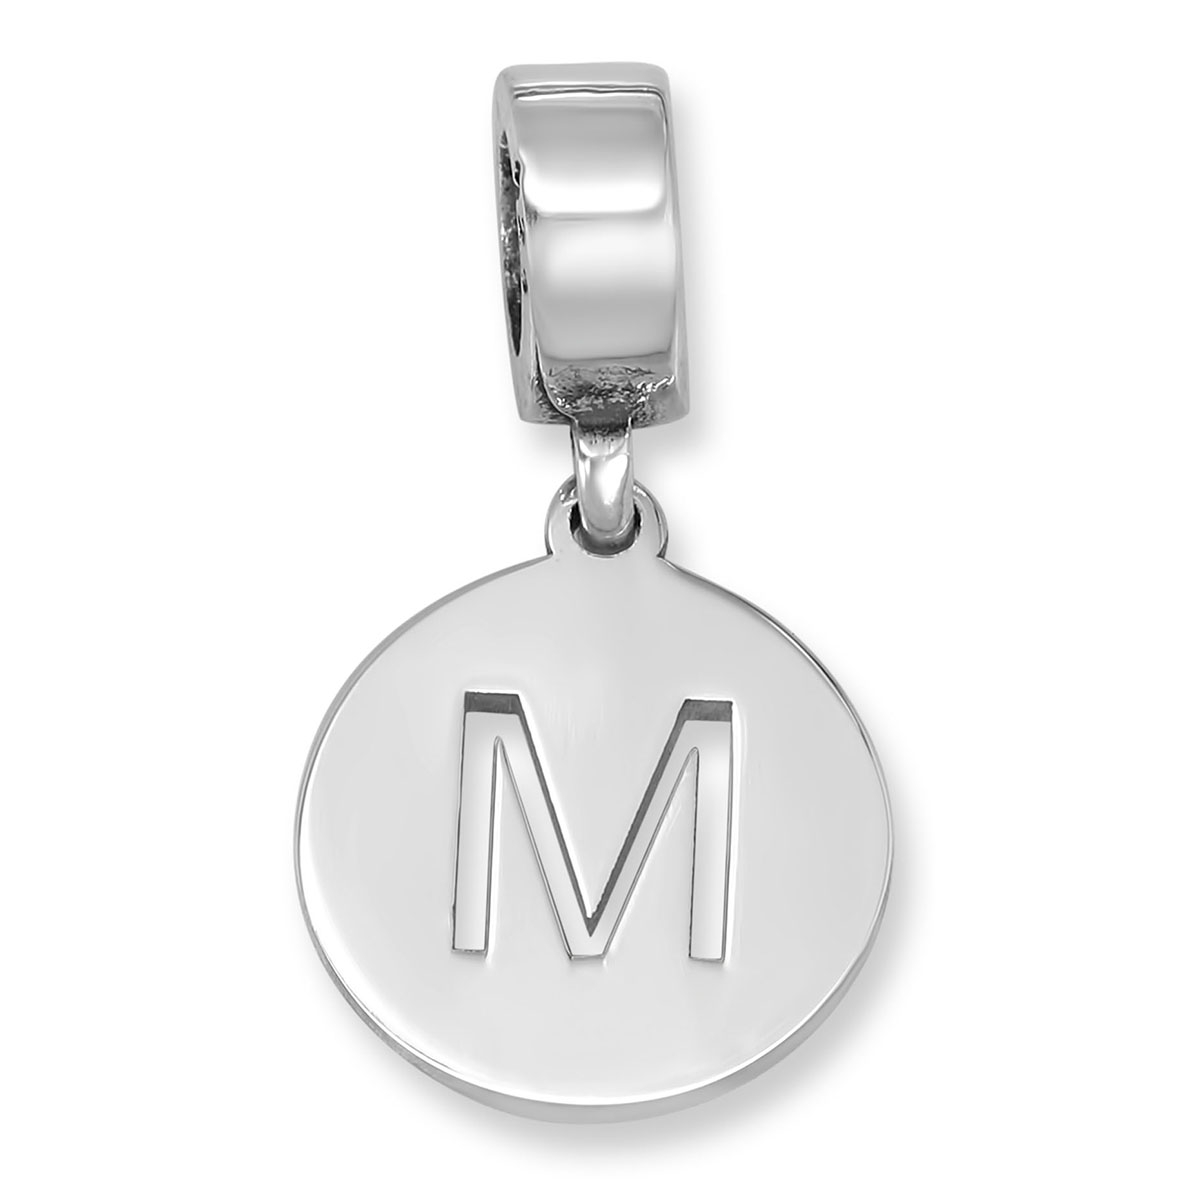 Disc Sterling Silver Cut-Out Initial Charm (English / Hebrew)  - 1